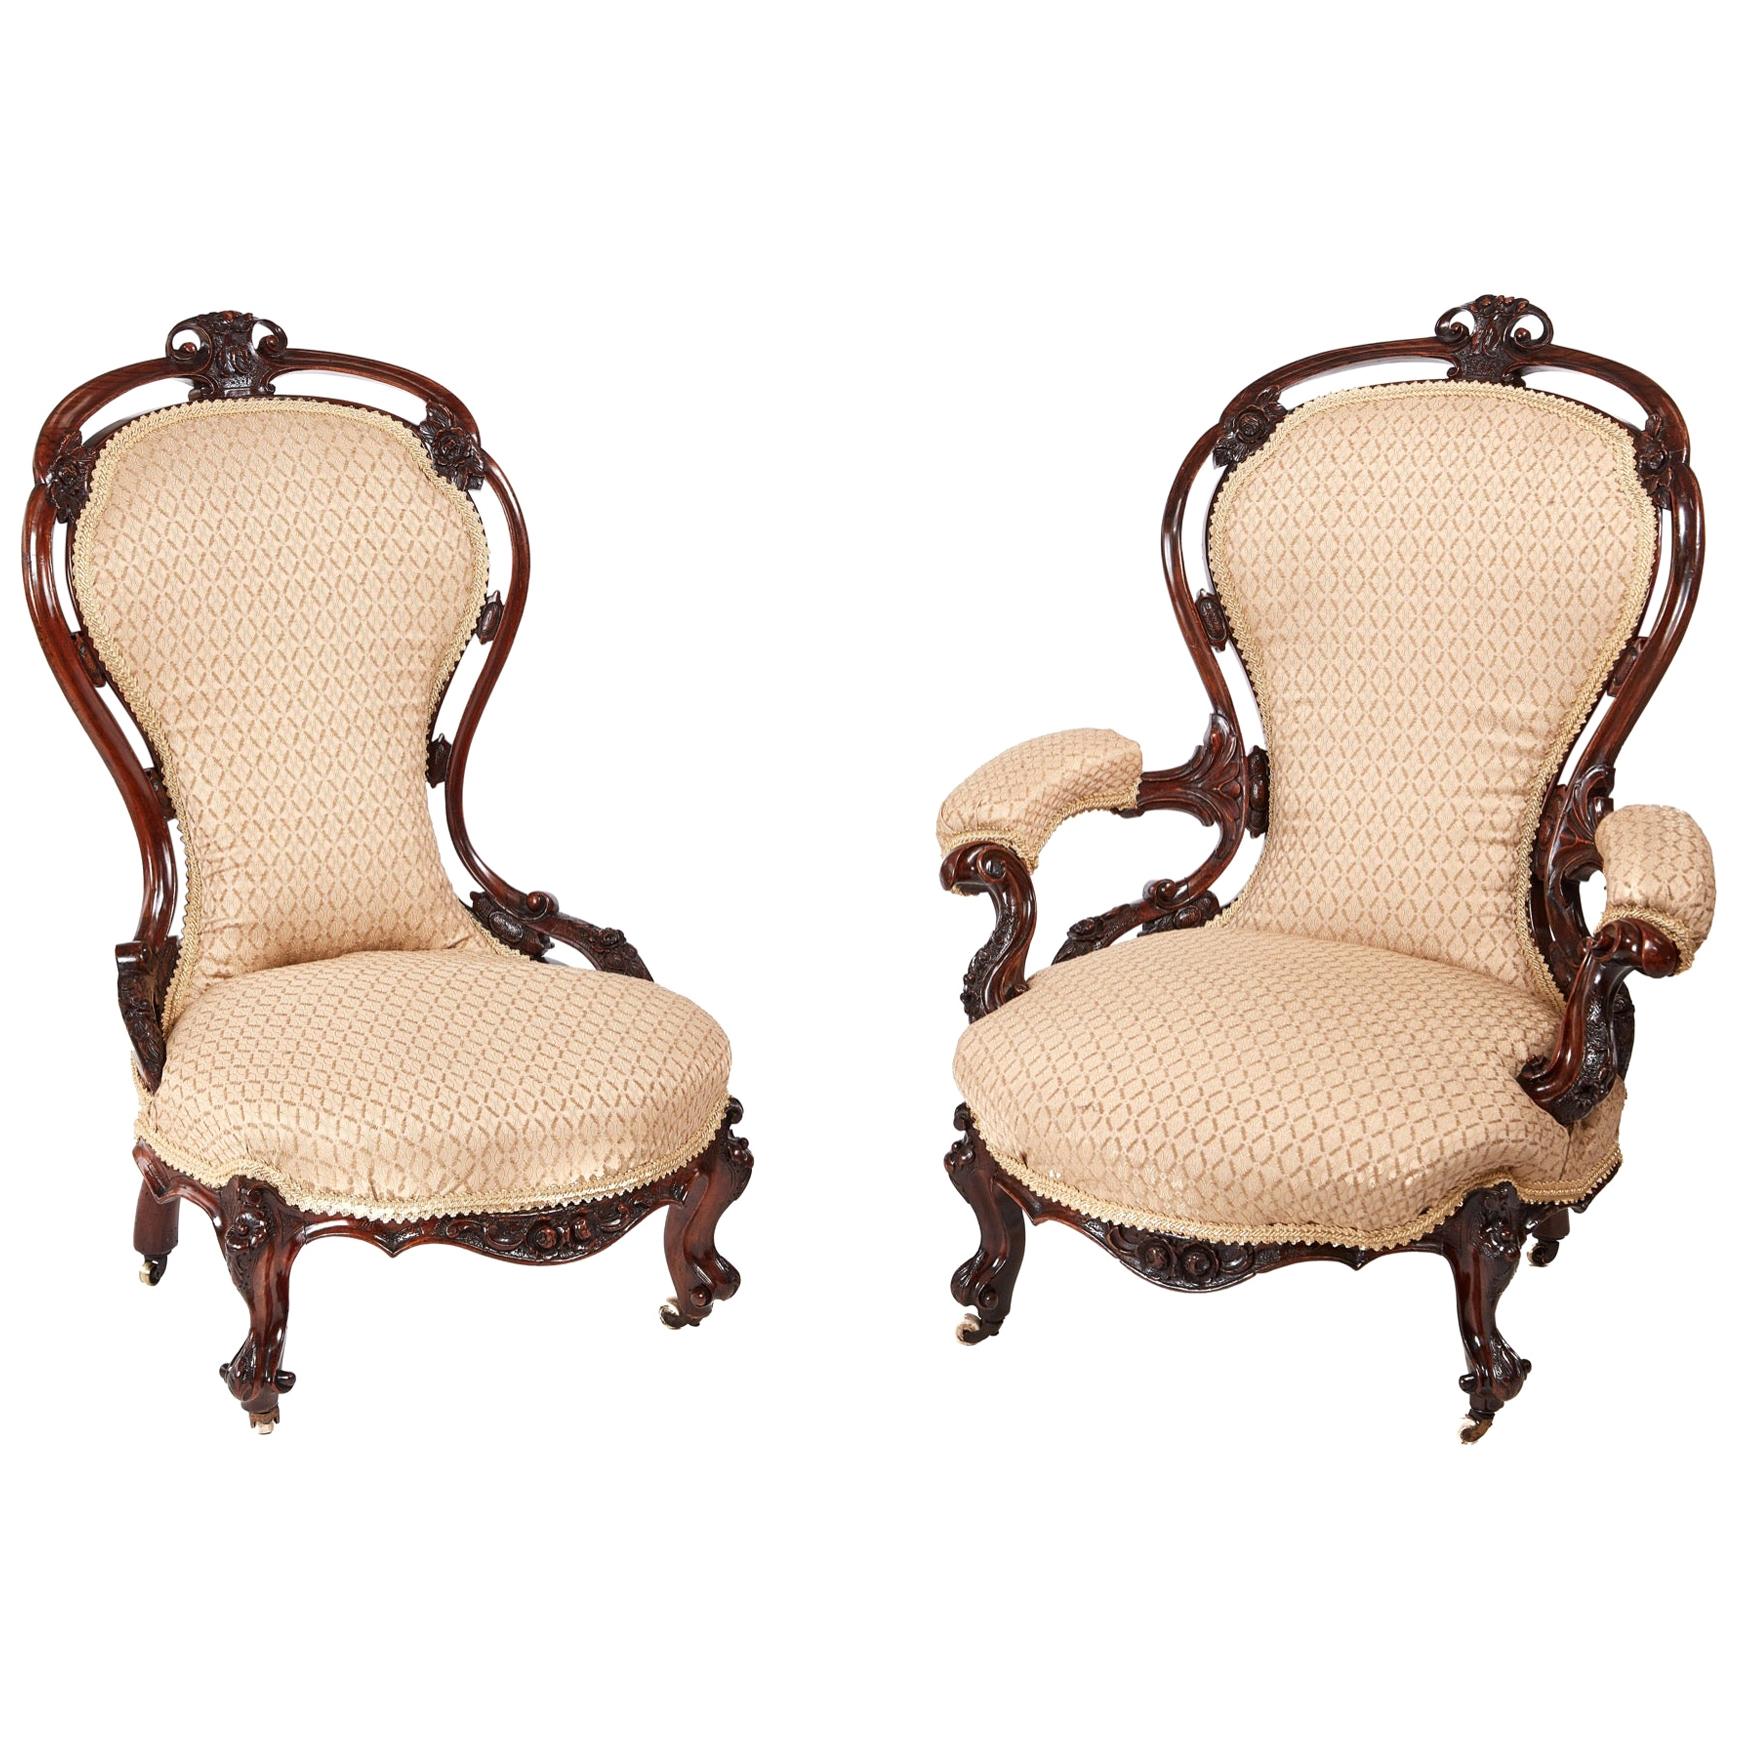 Pair of Victorian Carved Walnut Chairs For Sale